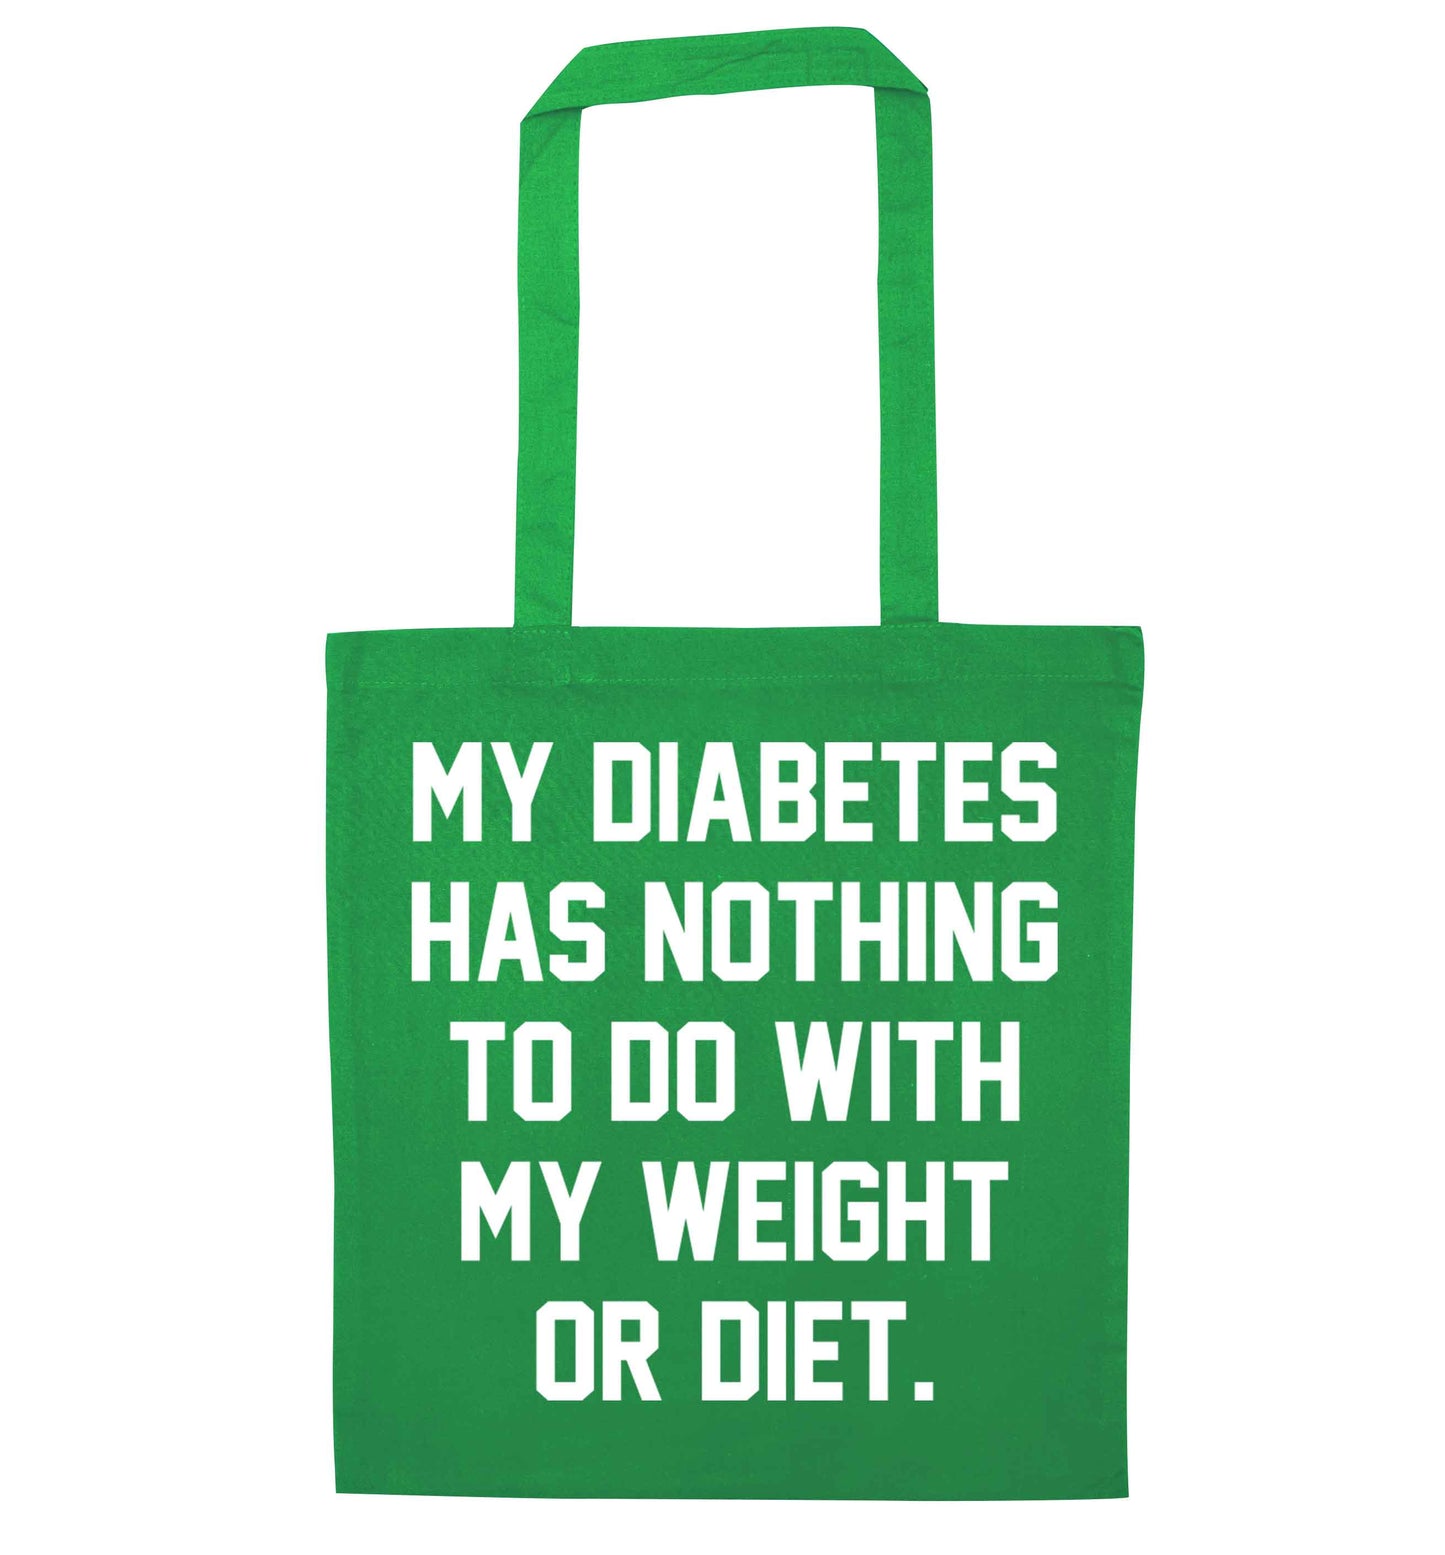 My diabetes has nothing to do with my weight or diet green tote bag